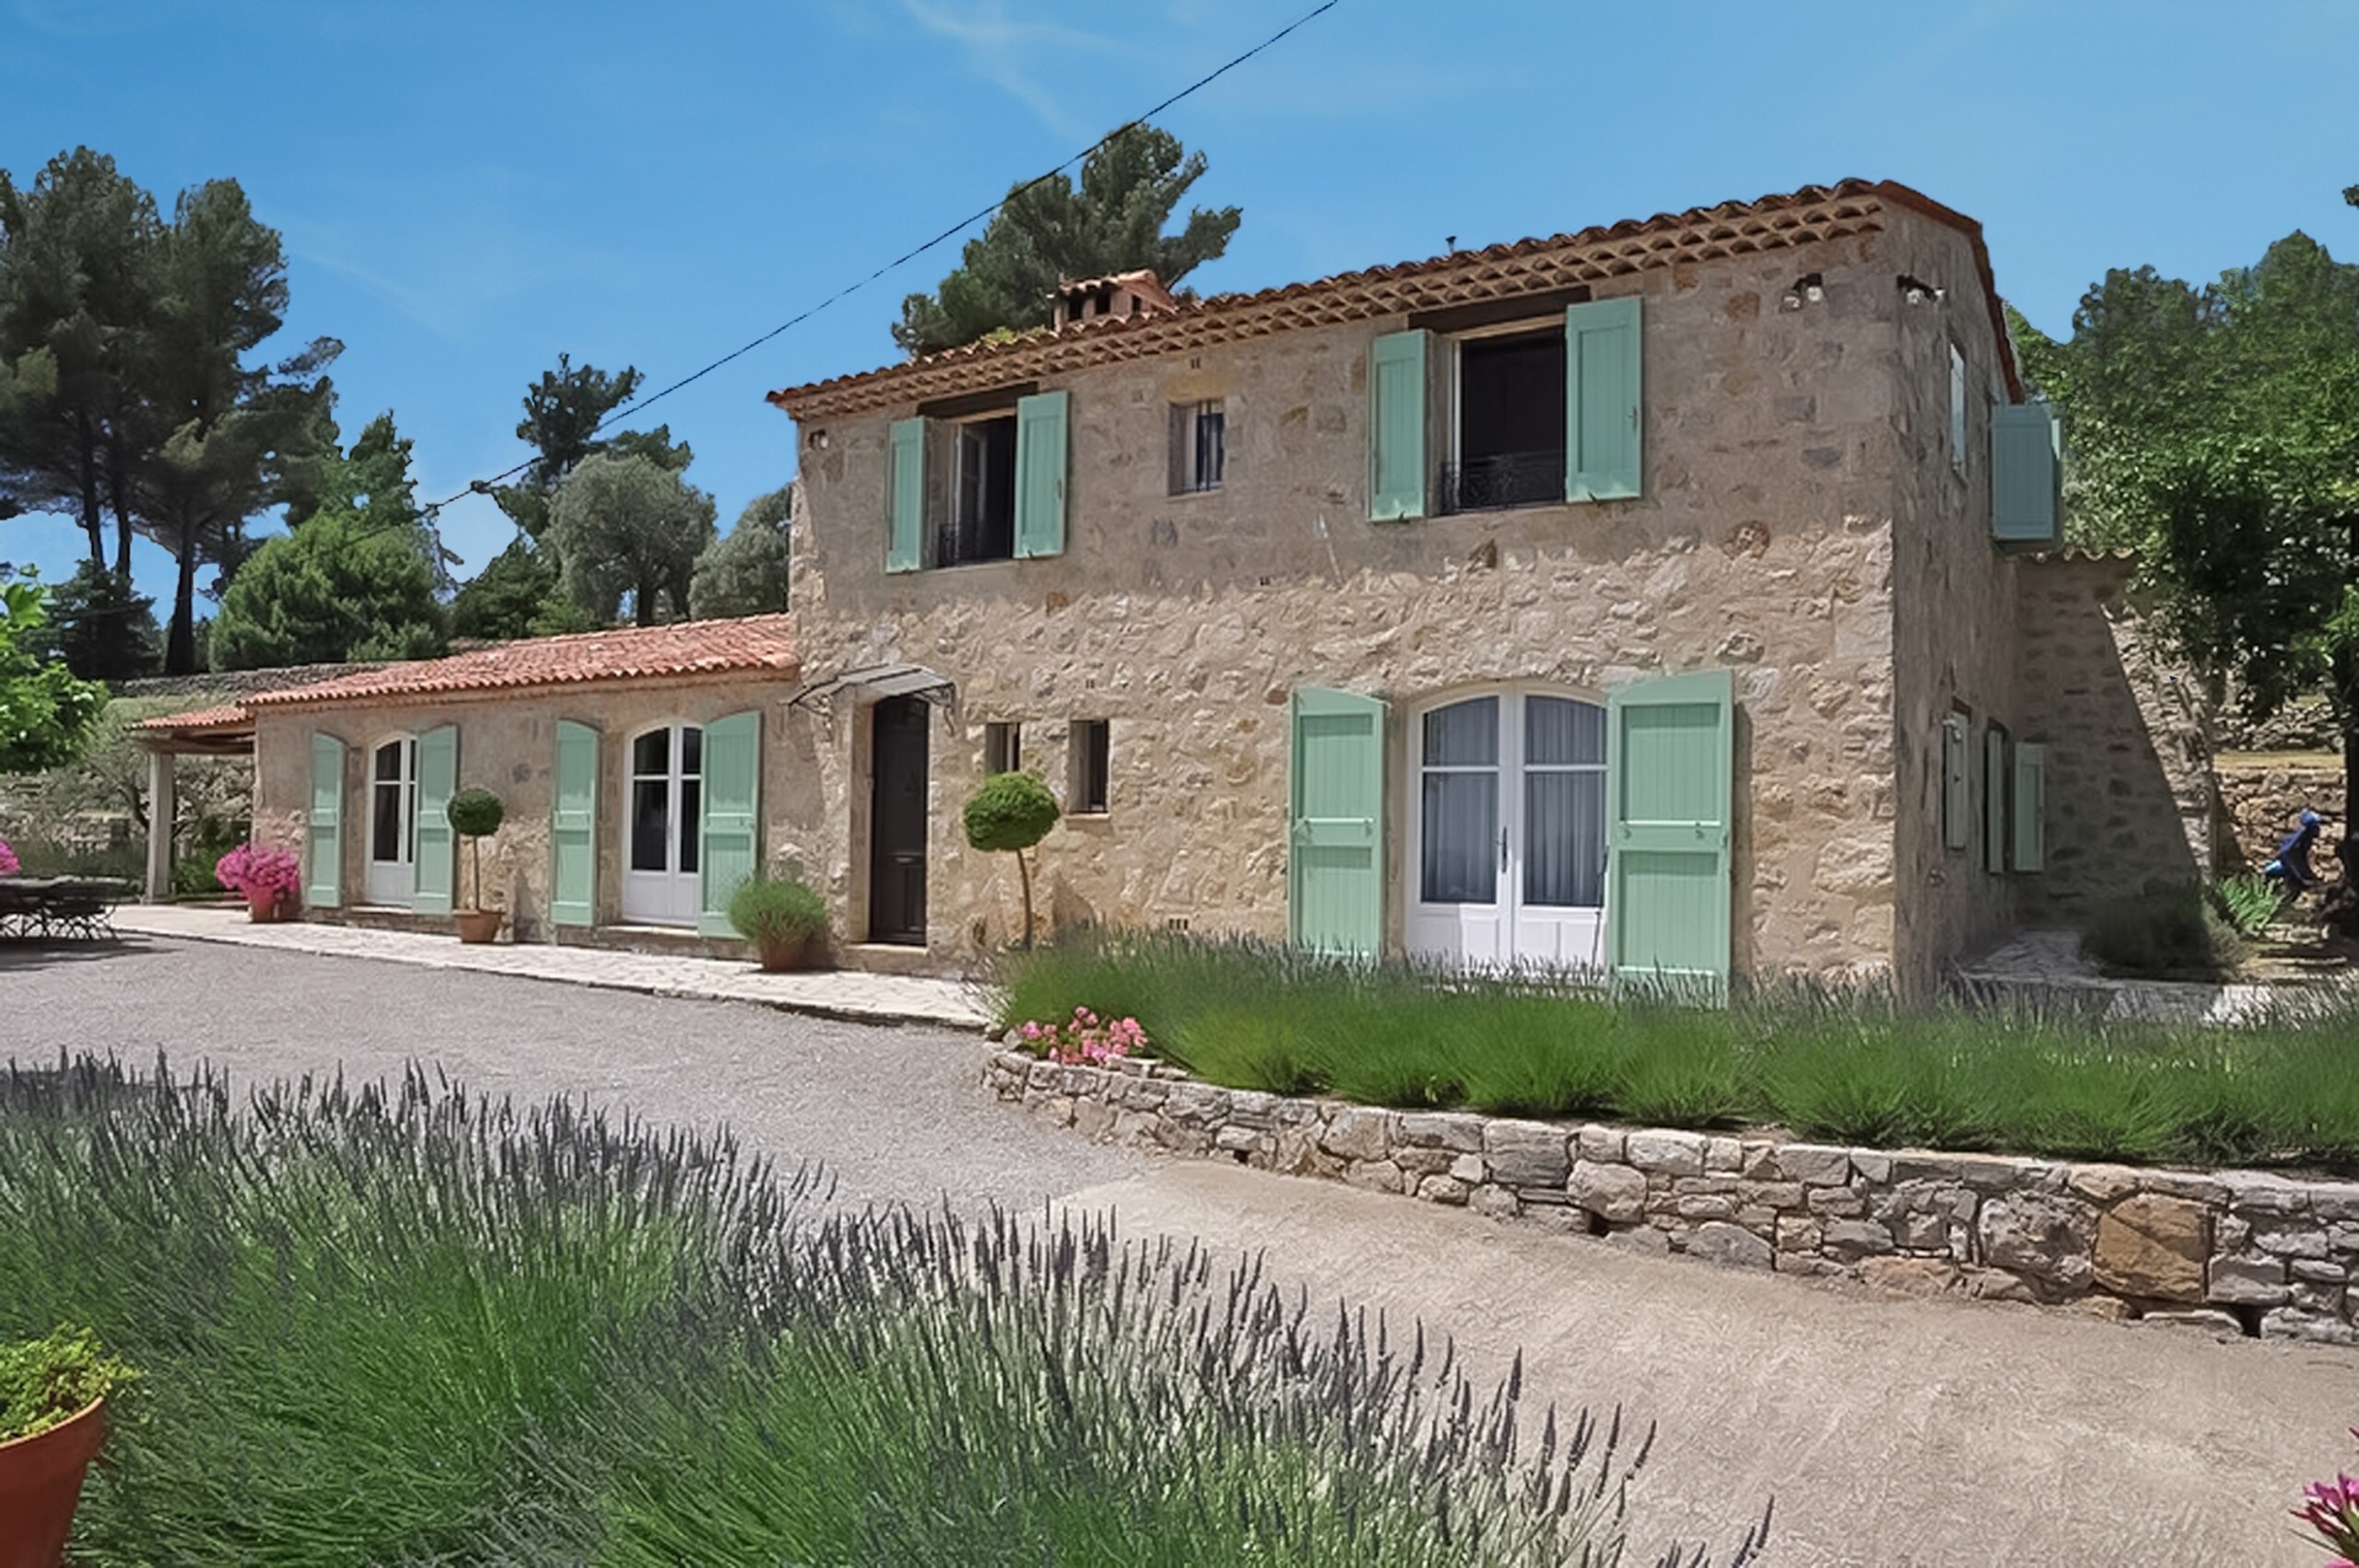 Discover Les Olivettes, a luxurious holiday villa with green shutters, fields of lavender, and a panoramic terrace. Located within walking distance of Fayence in Provence, this aerial view captures the entire villa, complete with a spacious pool and terraces